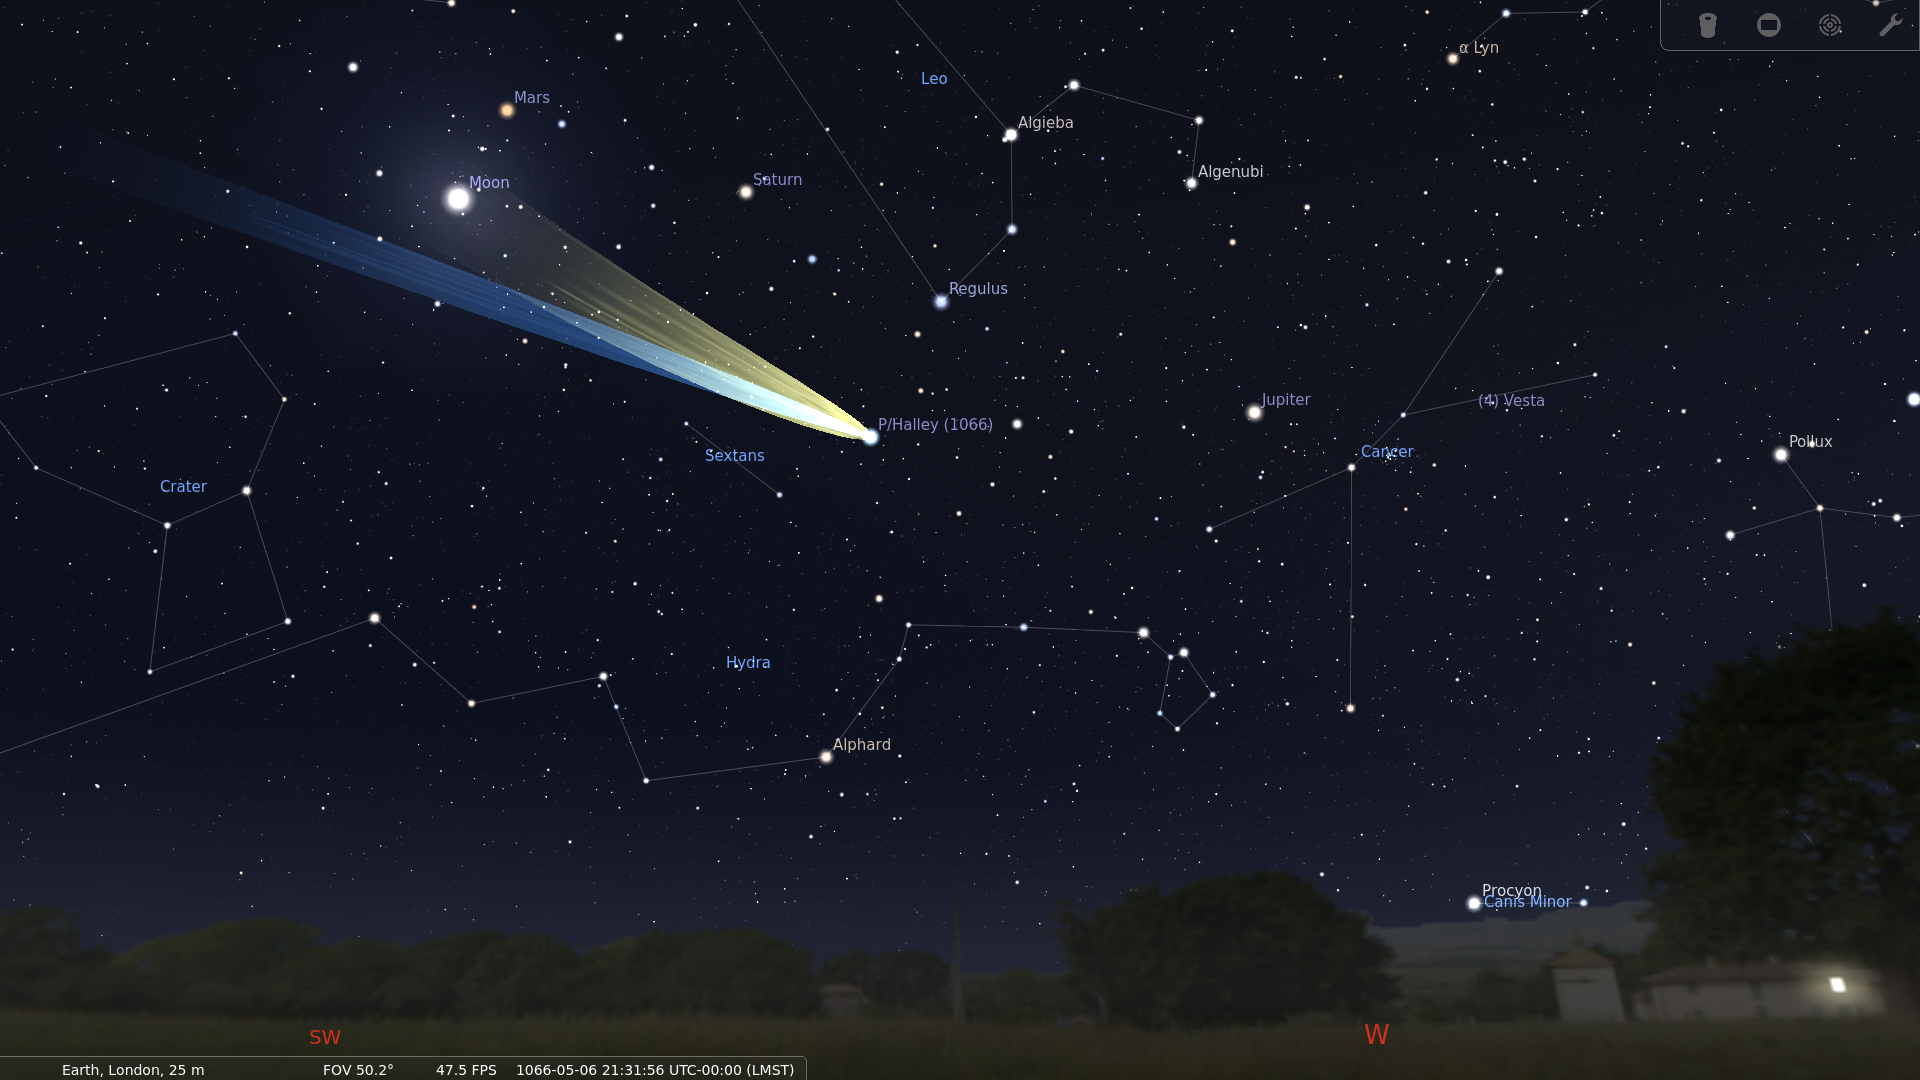 Halley's comet is seen in the sky above a field simulated in stellarium 1066